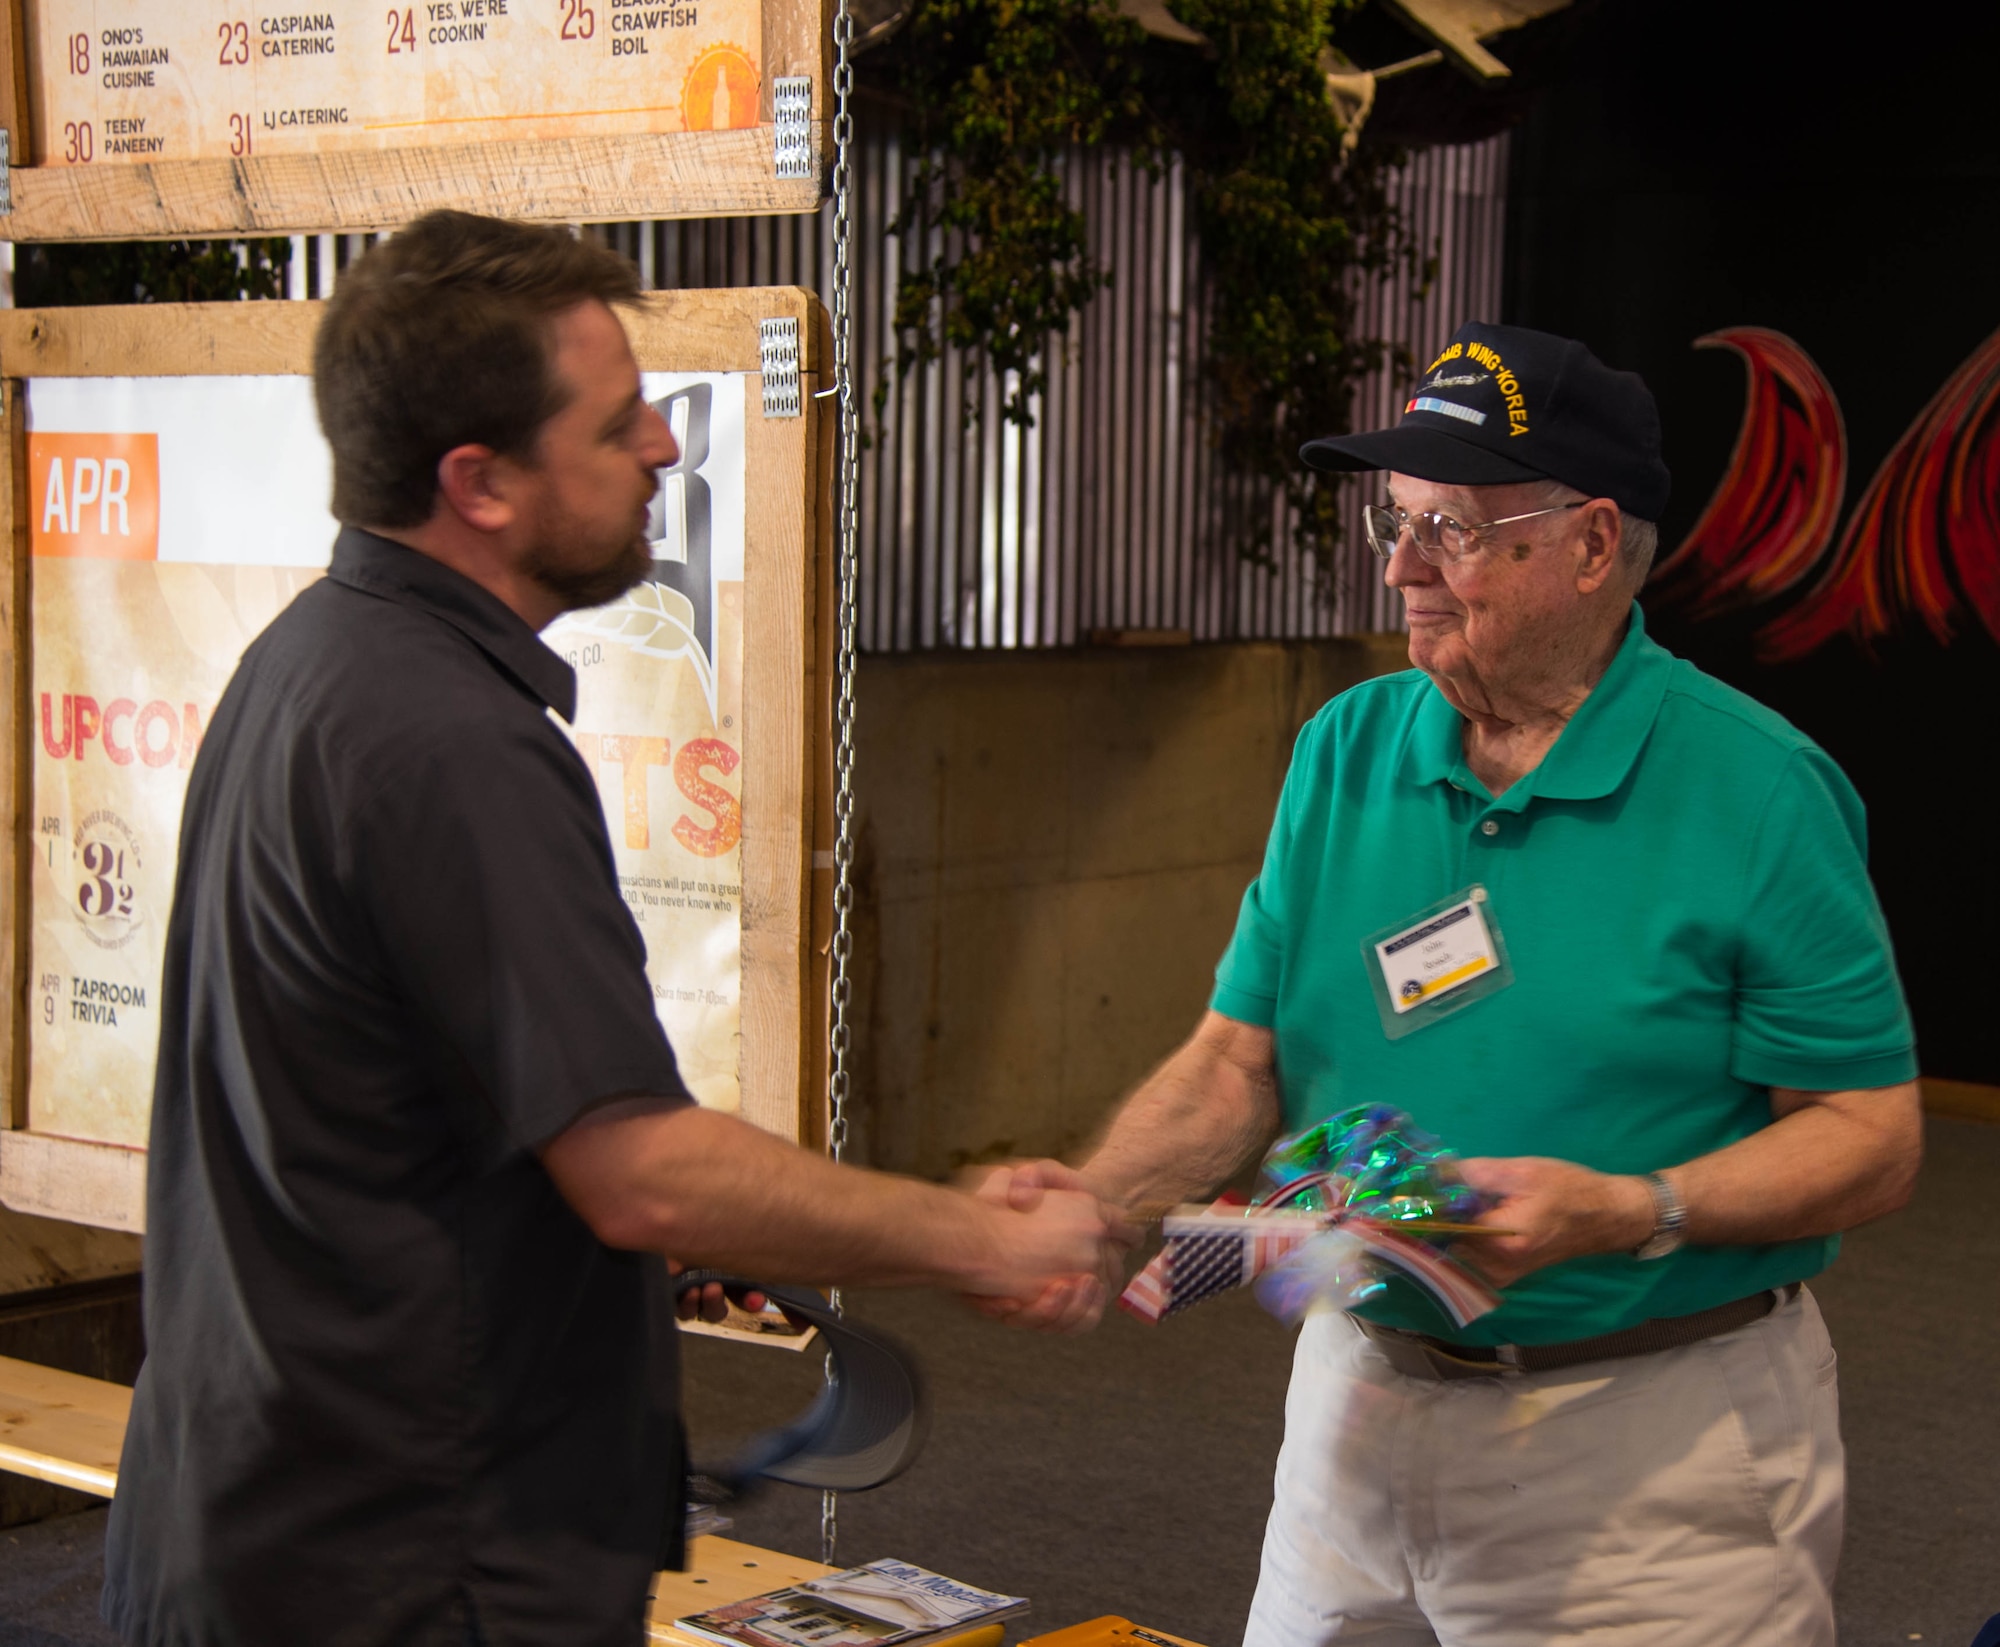 Jared Belville (left), Red River Brewing Co. managing partner, and John Roach (right), Korean War 307th Bombardment Group veteran, shakes hands during a tour of the Red River Brewing Co. in Shreveport, La., March 30, 2017. The 307th Bomb Wing celebrated their 75th Anniversary by taking alumni on a tour of Shreveport and Bossier City La, and hosting a gala to honor its bomber heritage. (U.S. Air Force photo by Staff Sgt. Jason McCasland/Released)